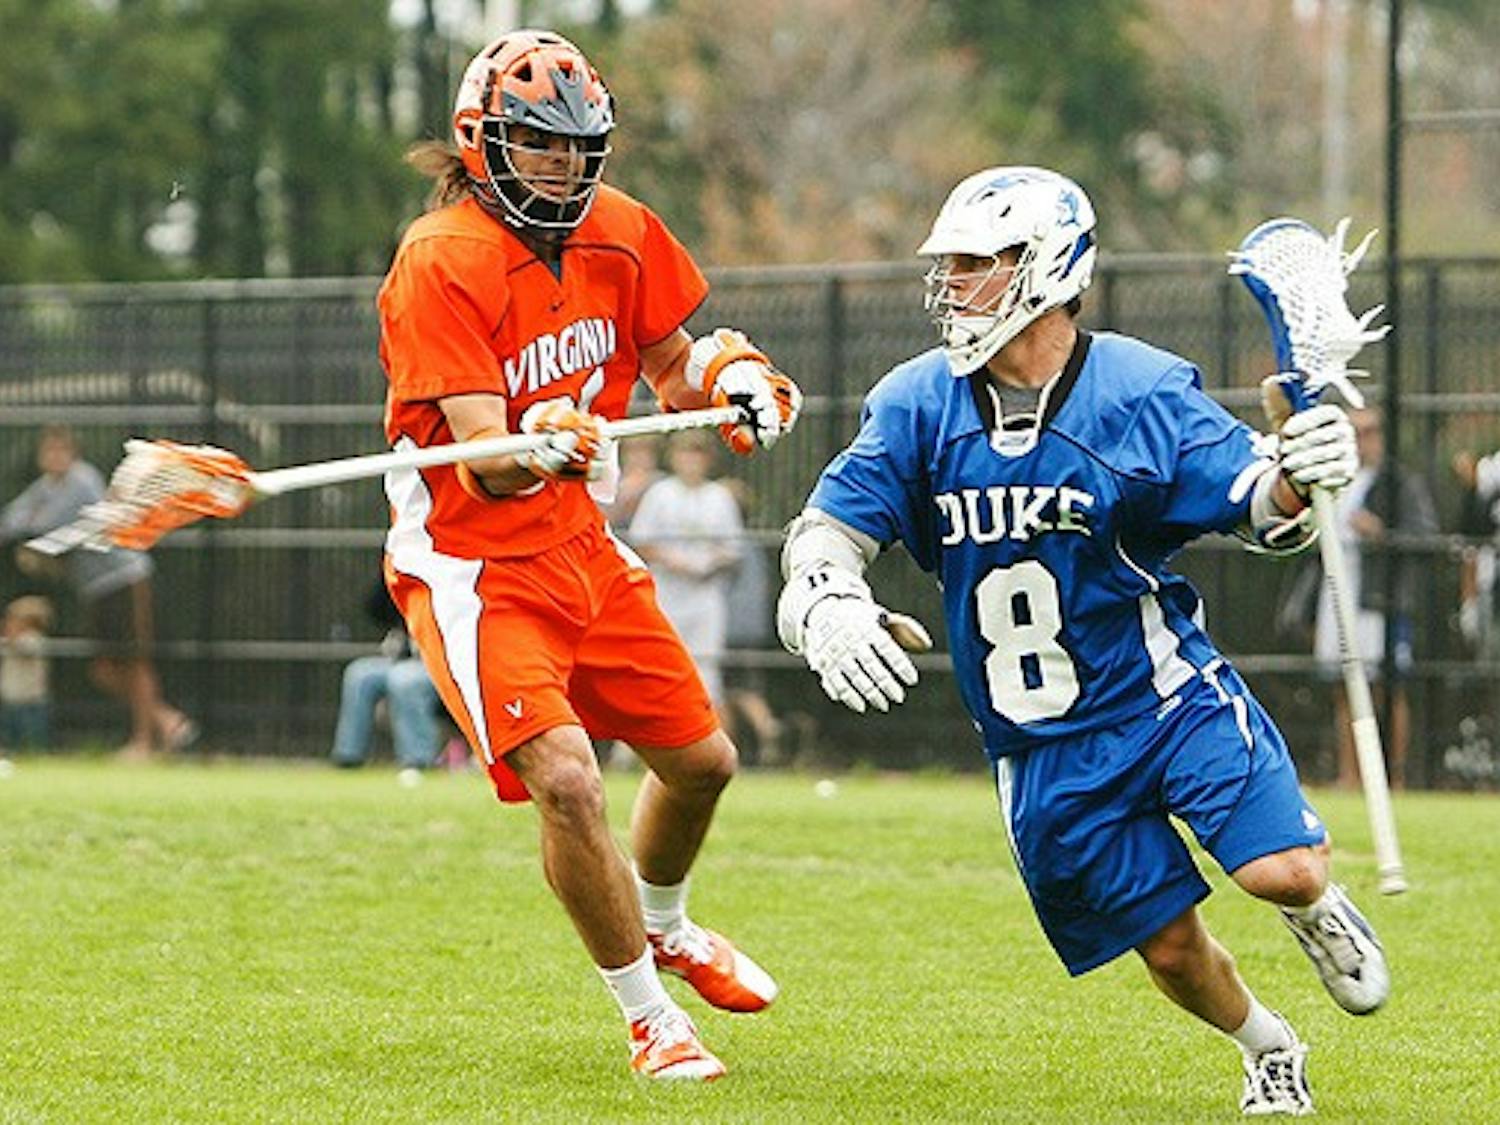 Senior Max Quinzani and the rest of Duke’s forwards could find the path to goal well-defended by Notre Dame goalie Scott Rodgers.